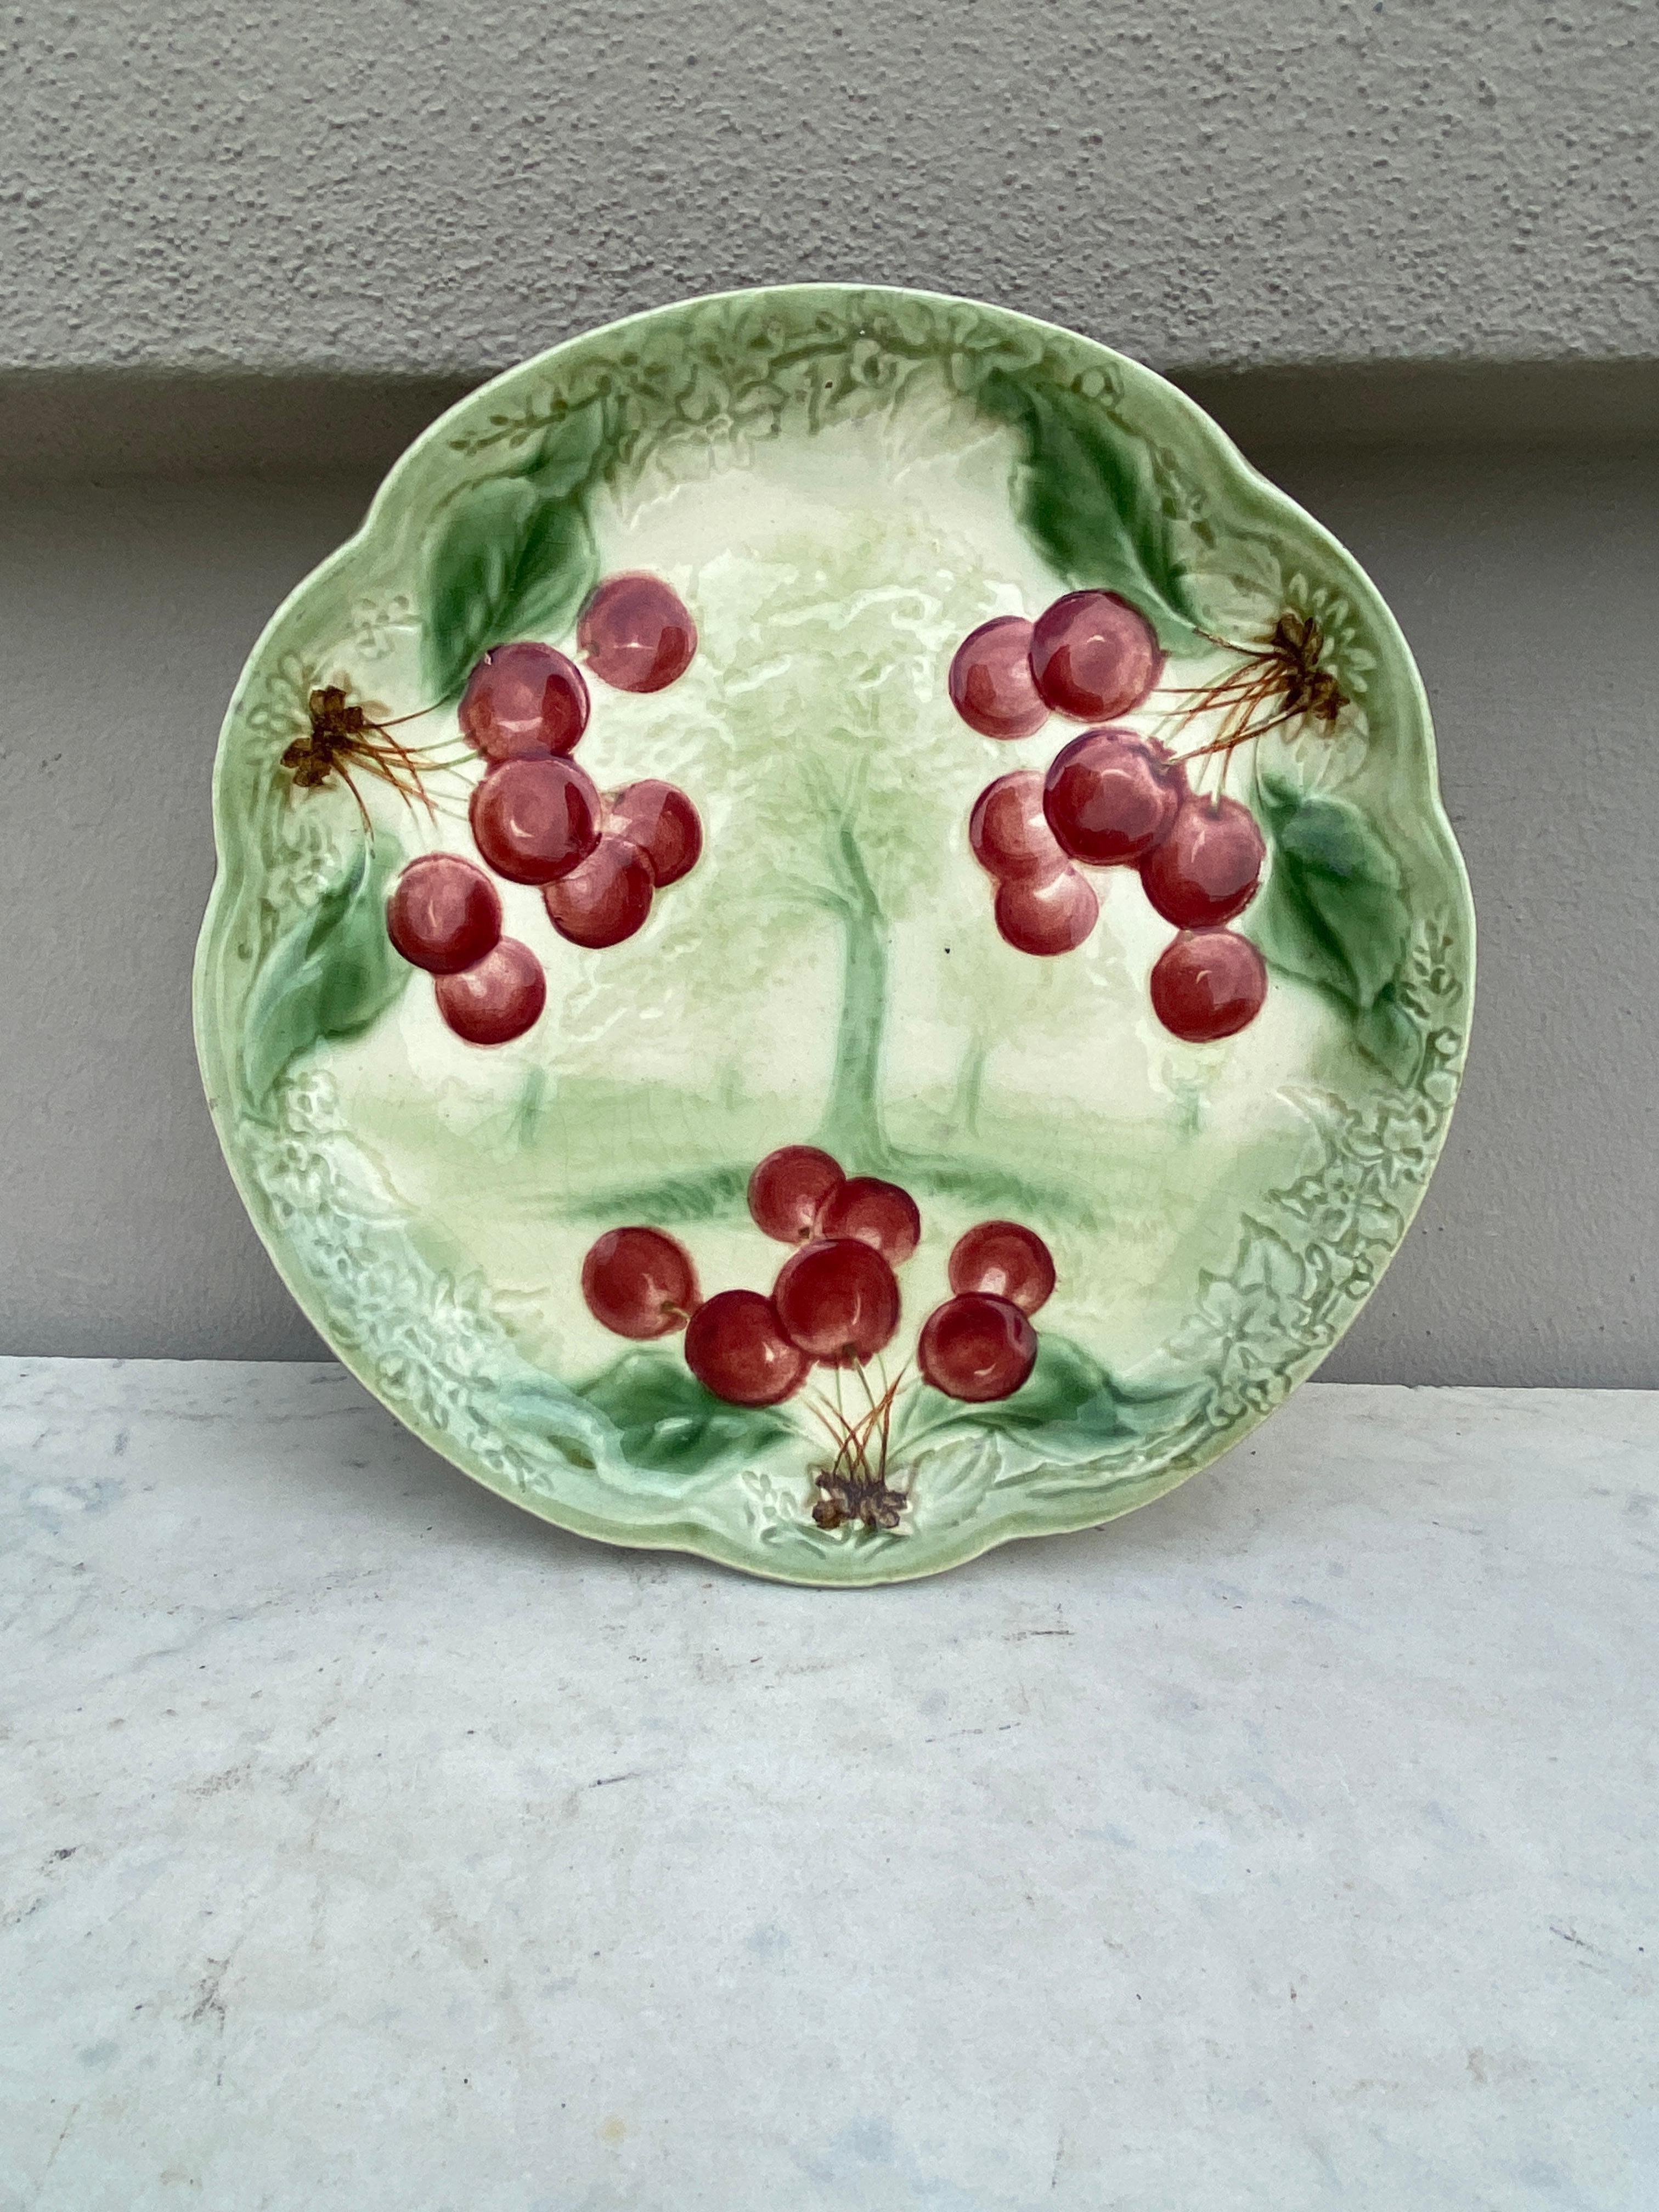 19th century Majolica Cherries Plate signed Choisy Le Roi.
Made for Higgins & Setter New York.
The Higgins & Seiter Company of New York City began selling decorations for the table, including rich-cut glass in 1887. By 1891 the firm was